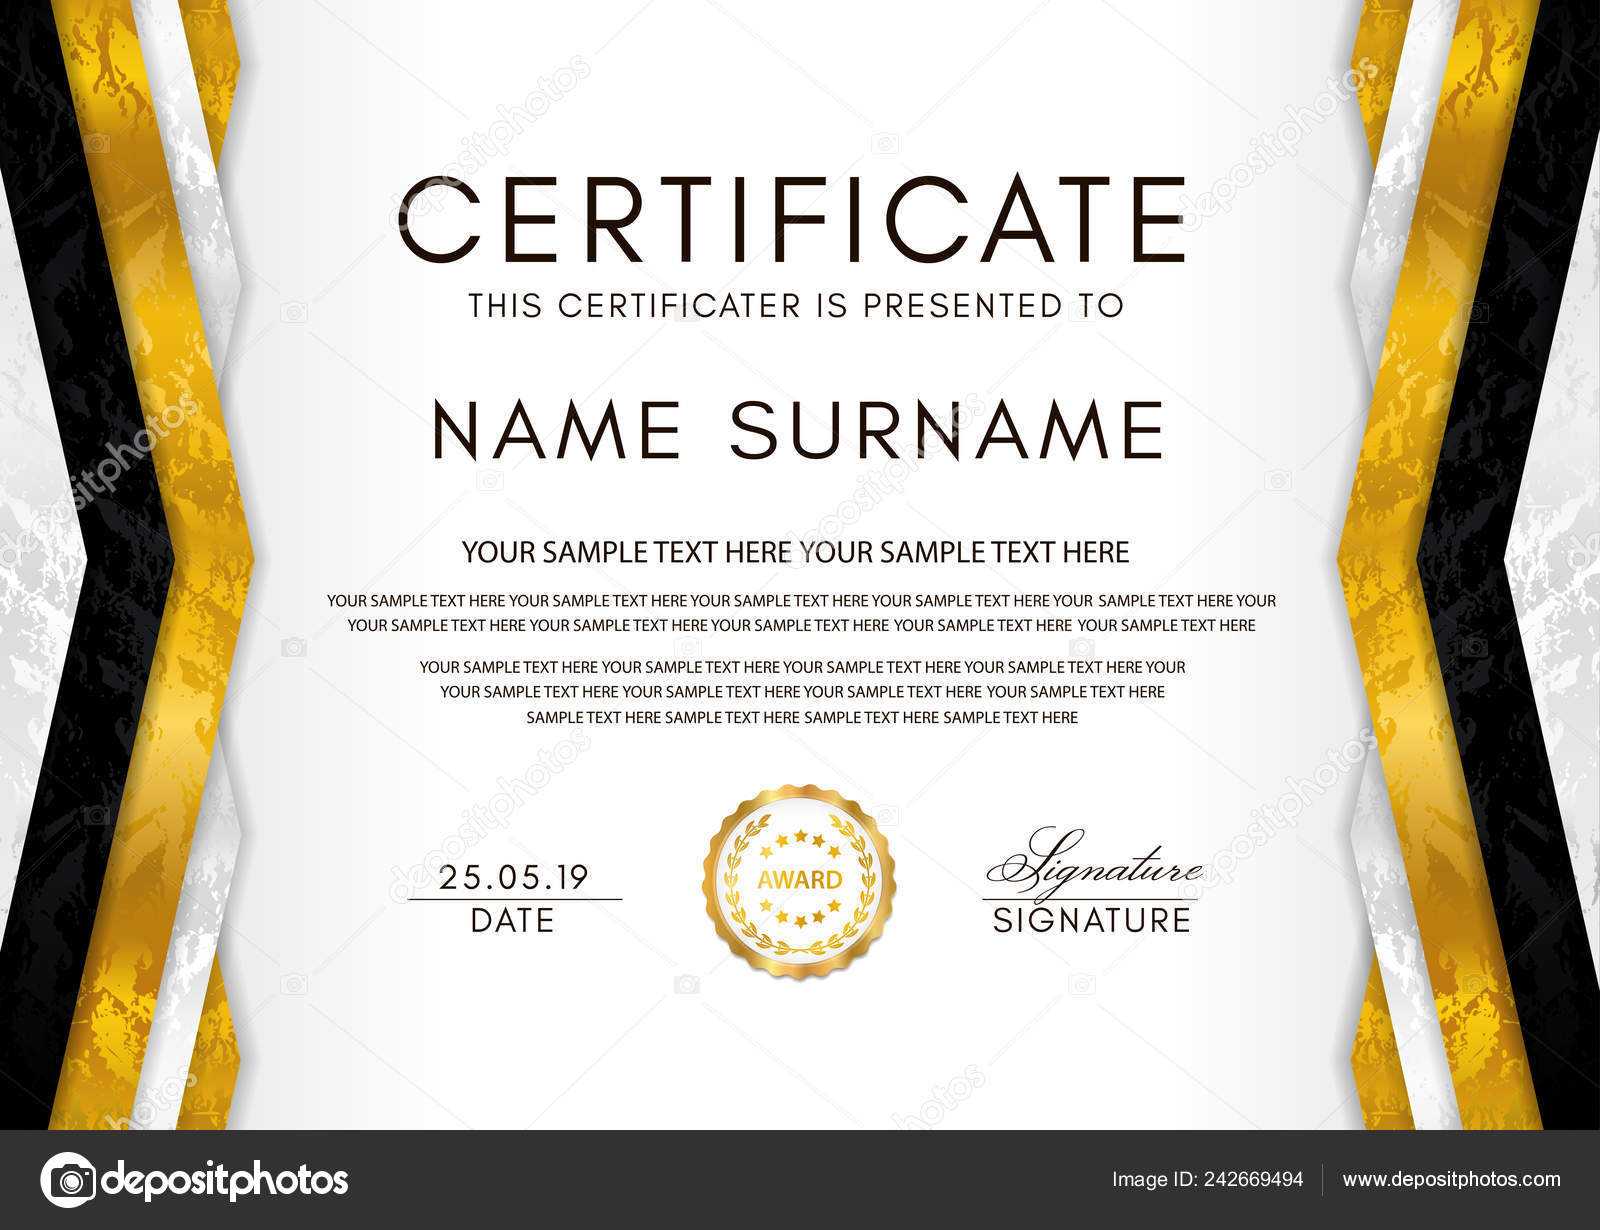 Certificate Template Geometry Frame Gold Badge White Within Award Of Excellence Certificate Template